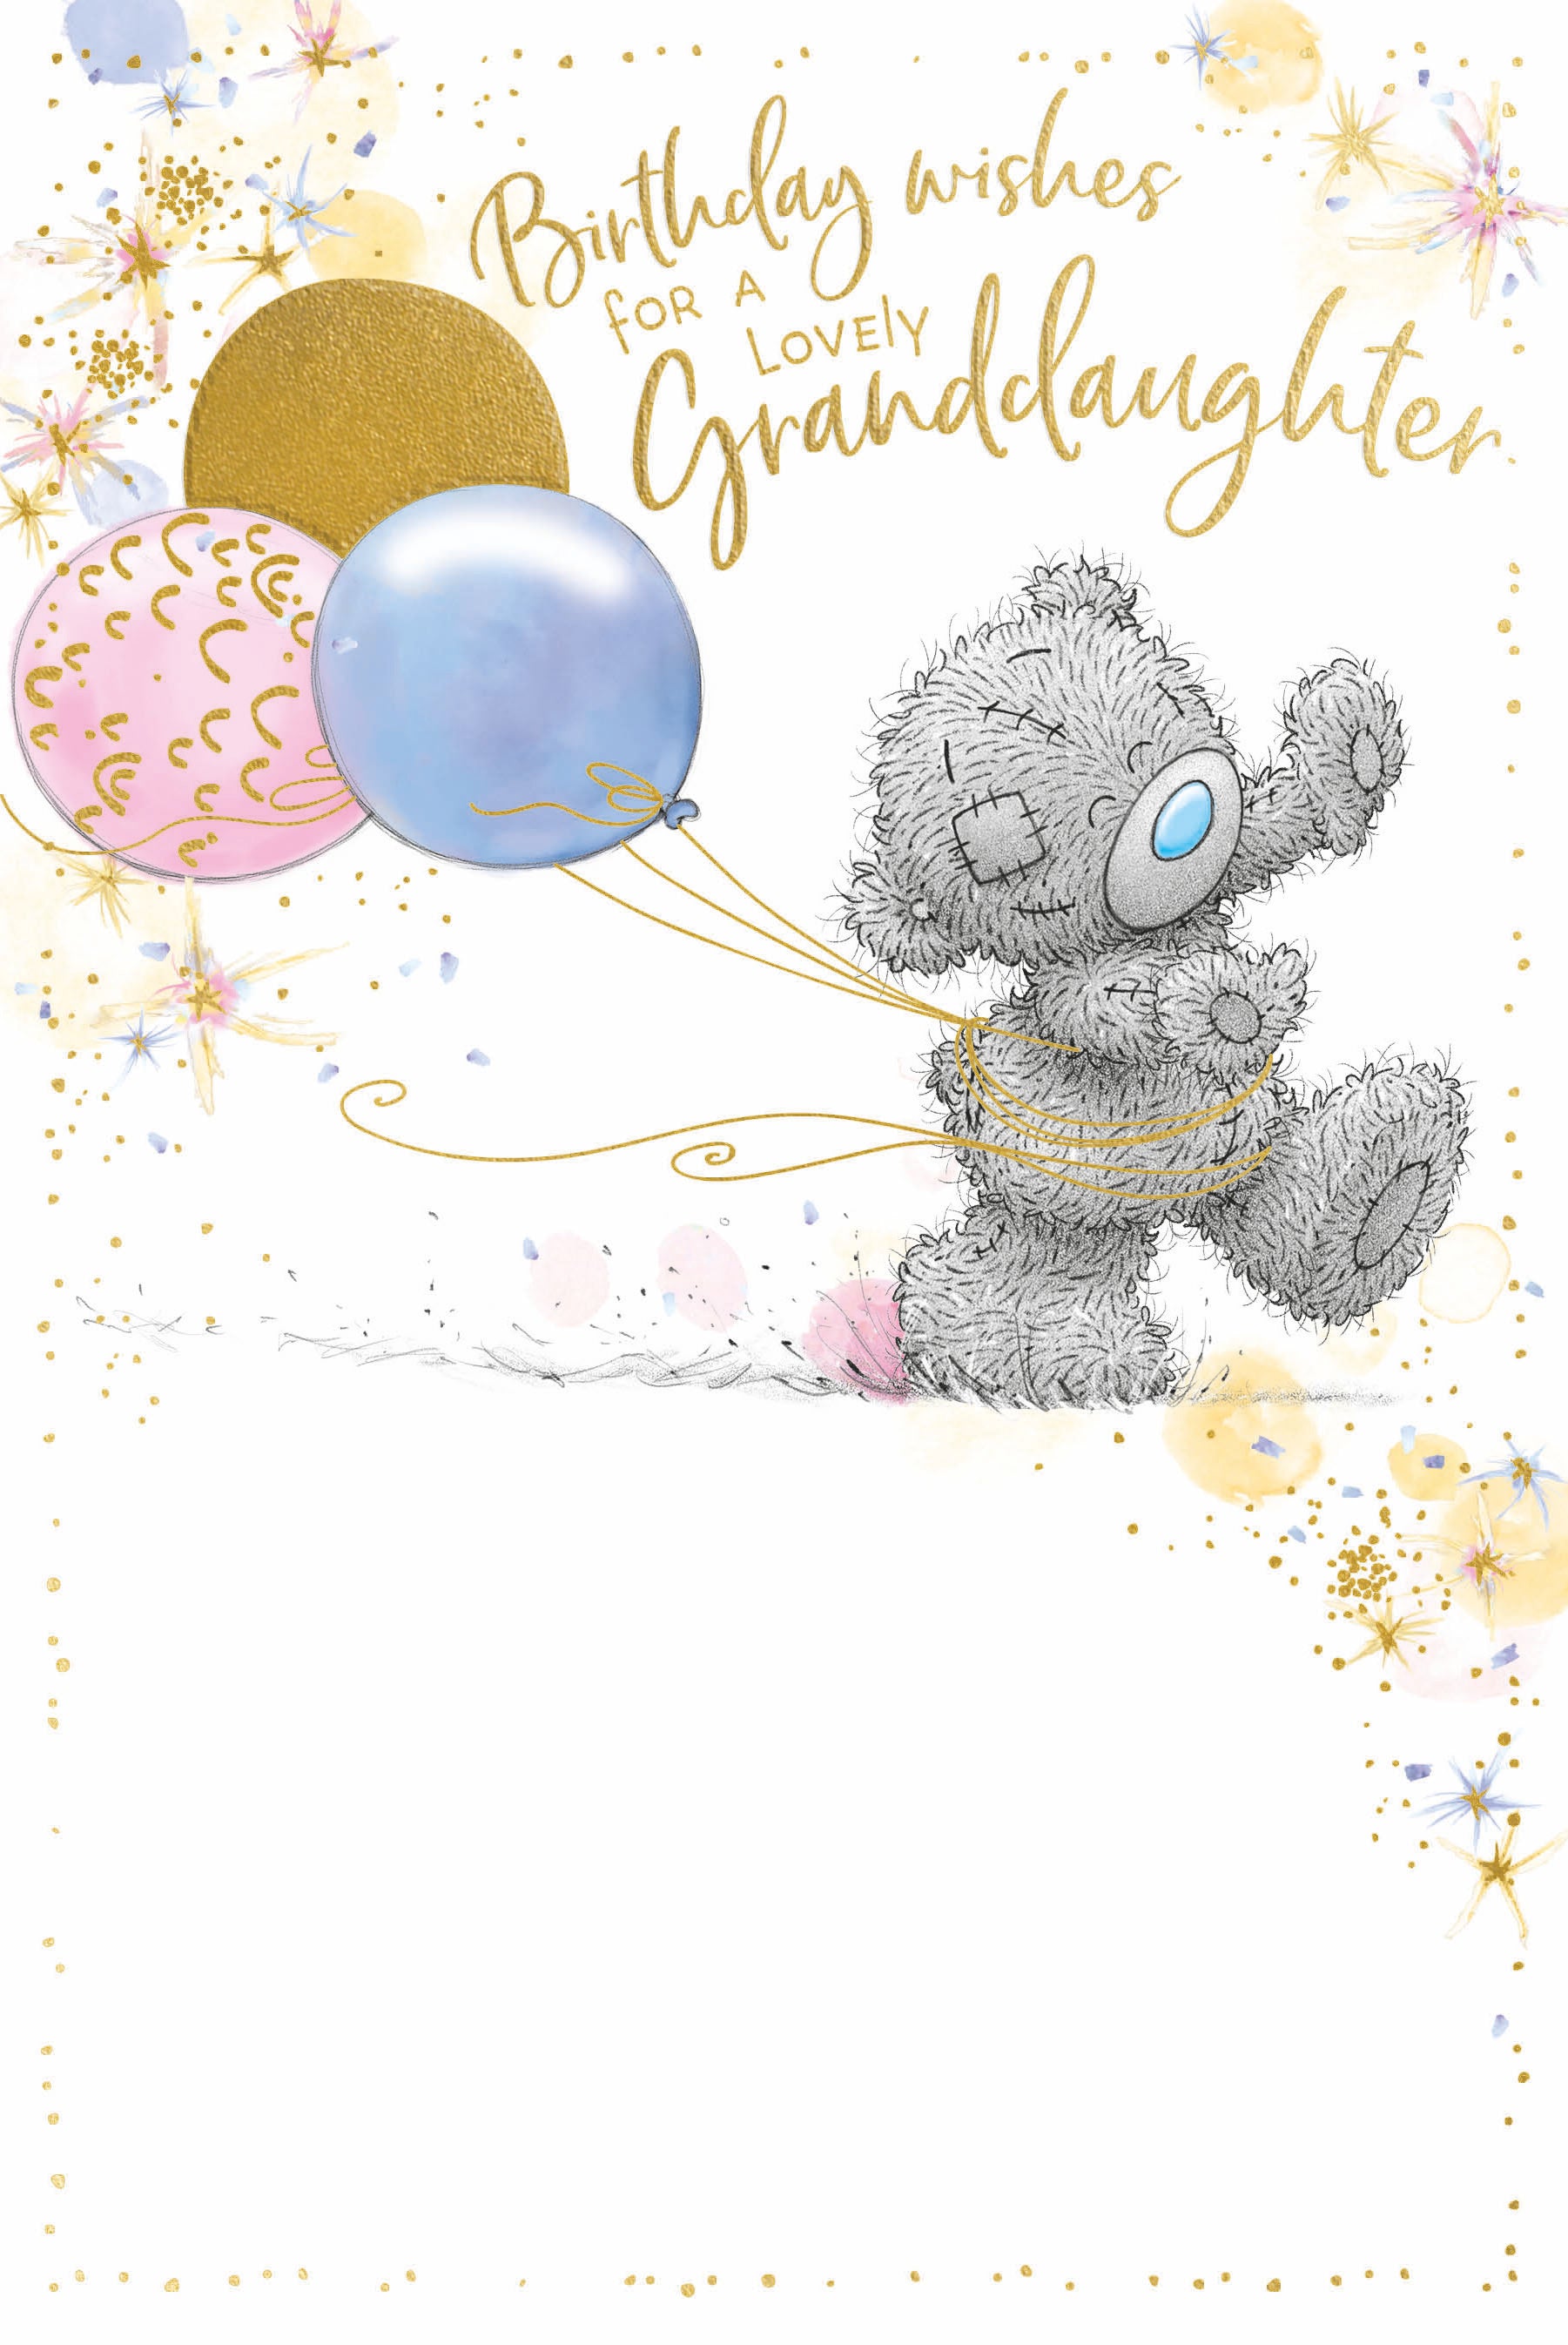 Granddaughter Birthday Card - Bear With Bunch of Baloons